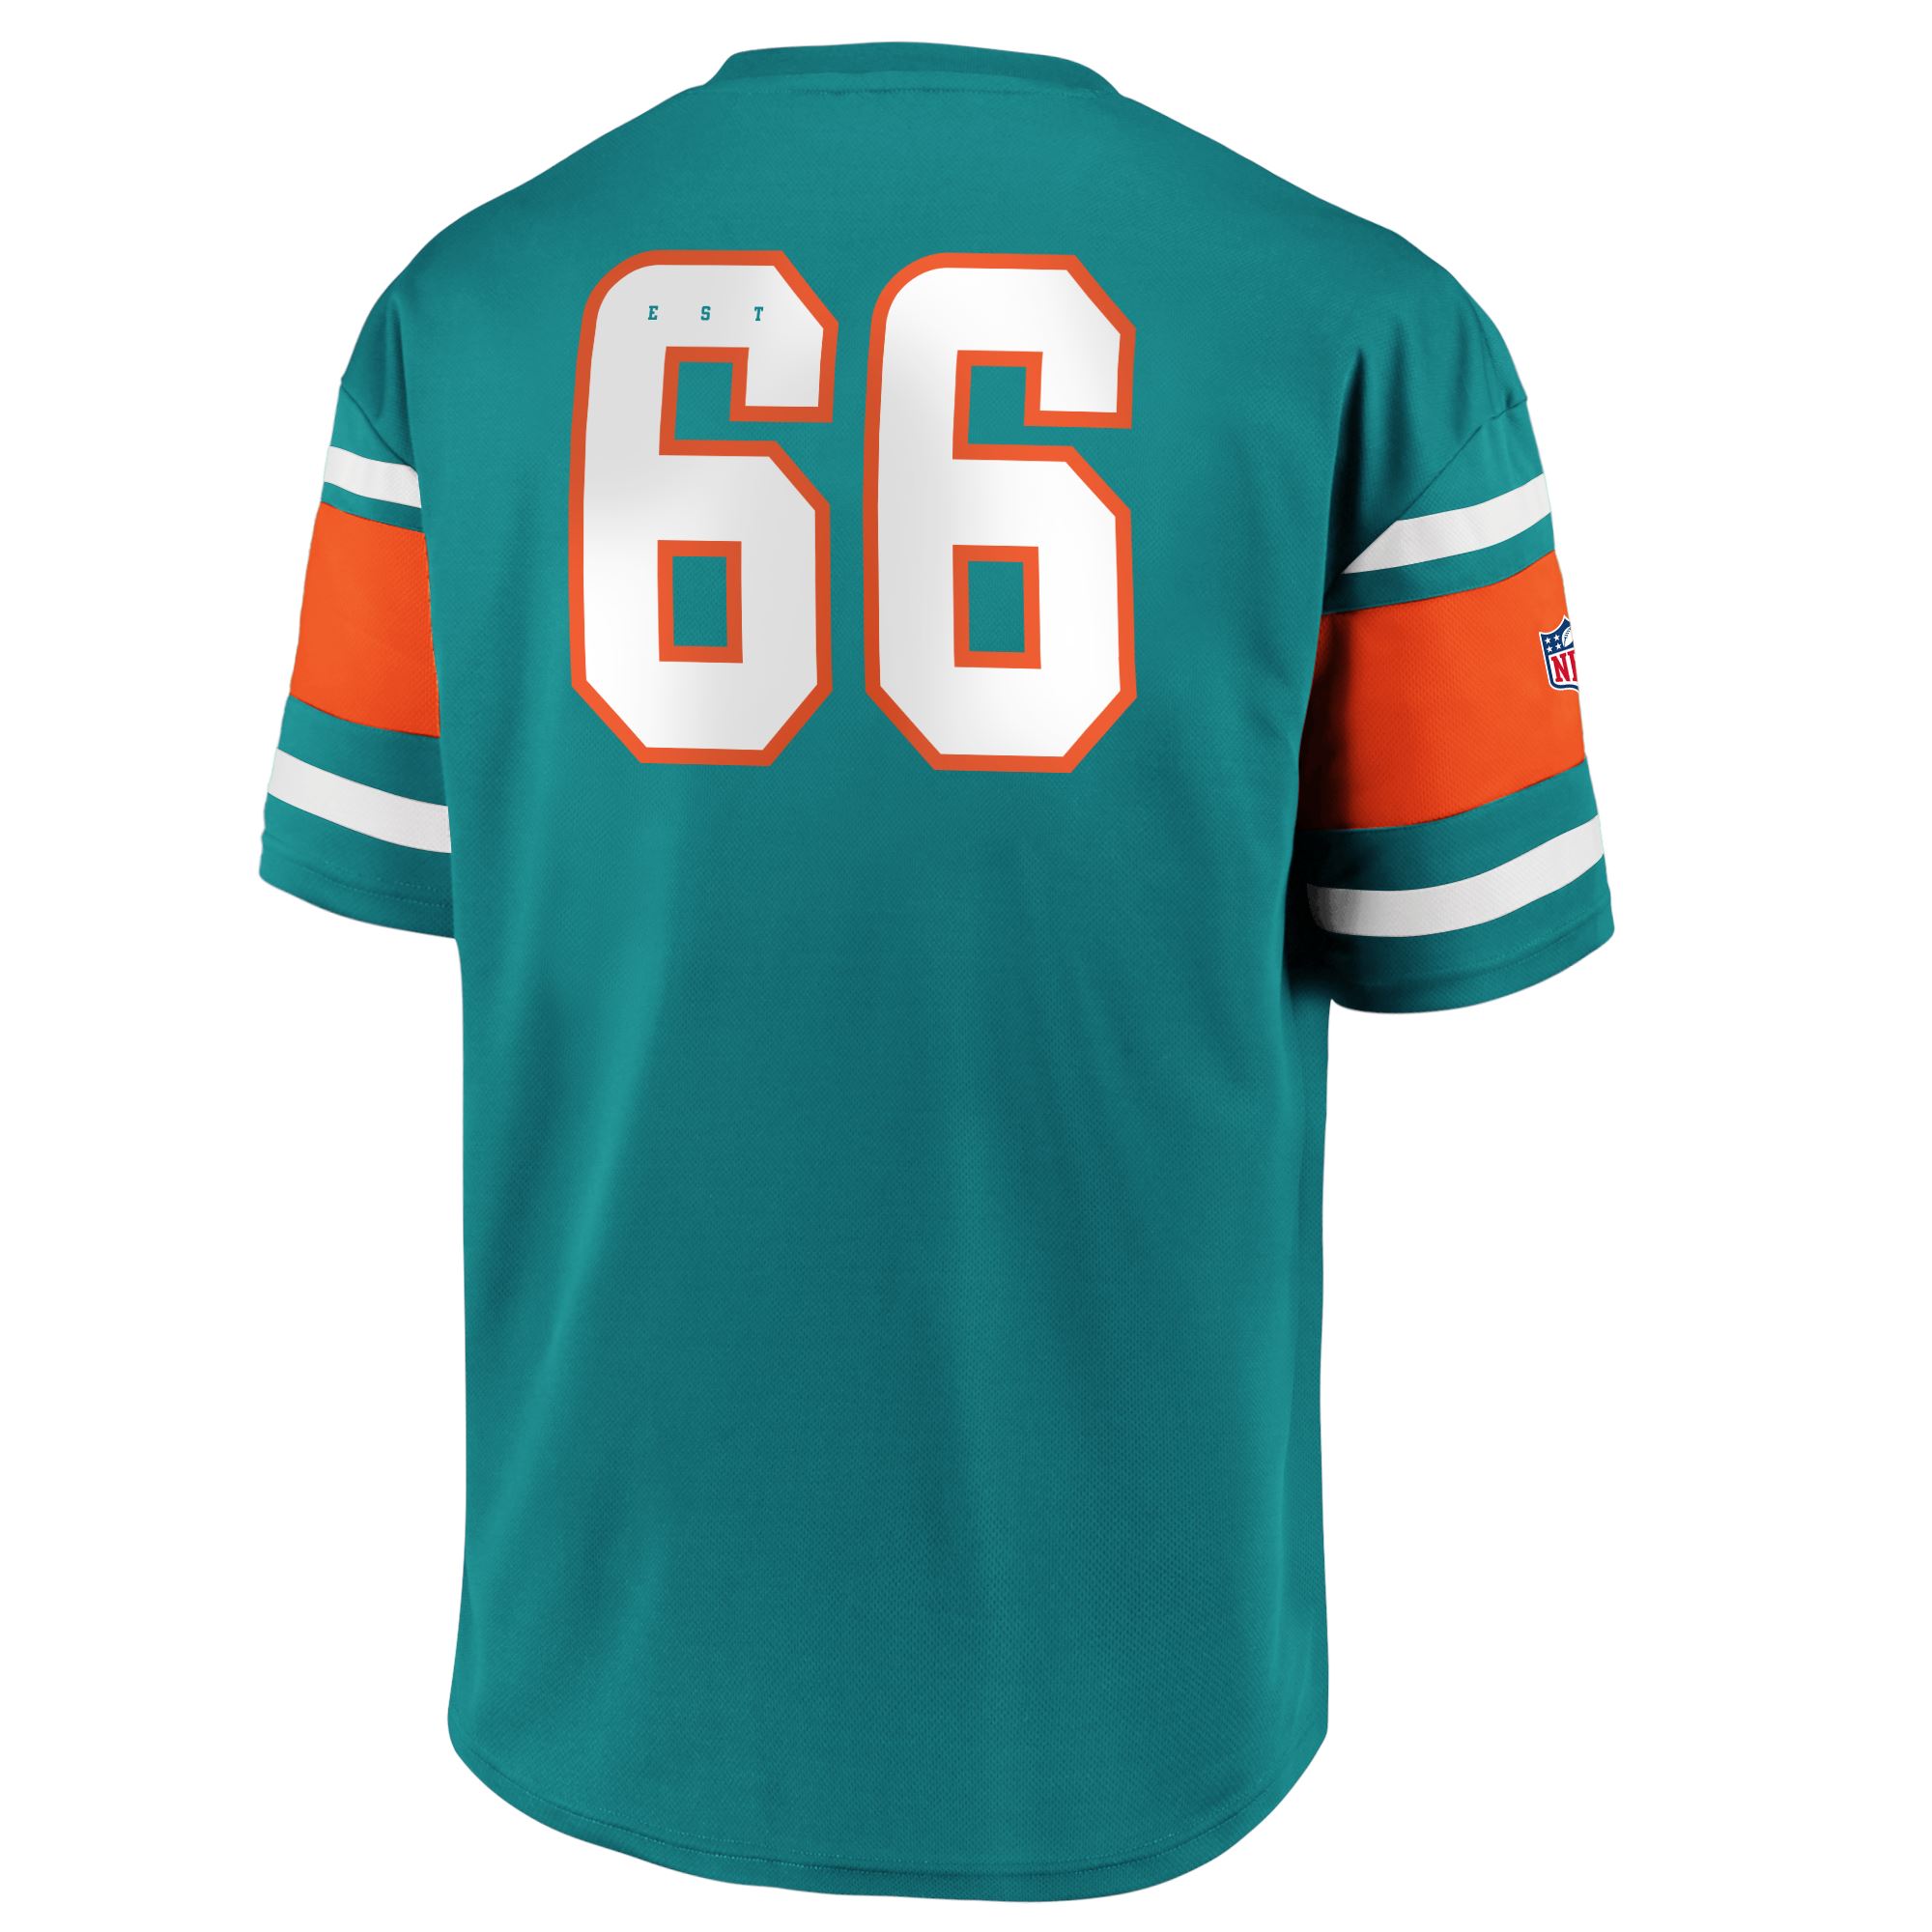 Miami Dolphins NFL Supporters Jersey Fanatics